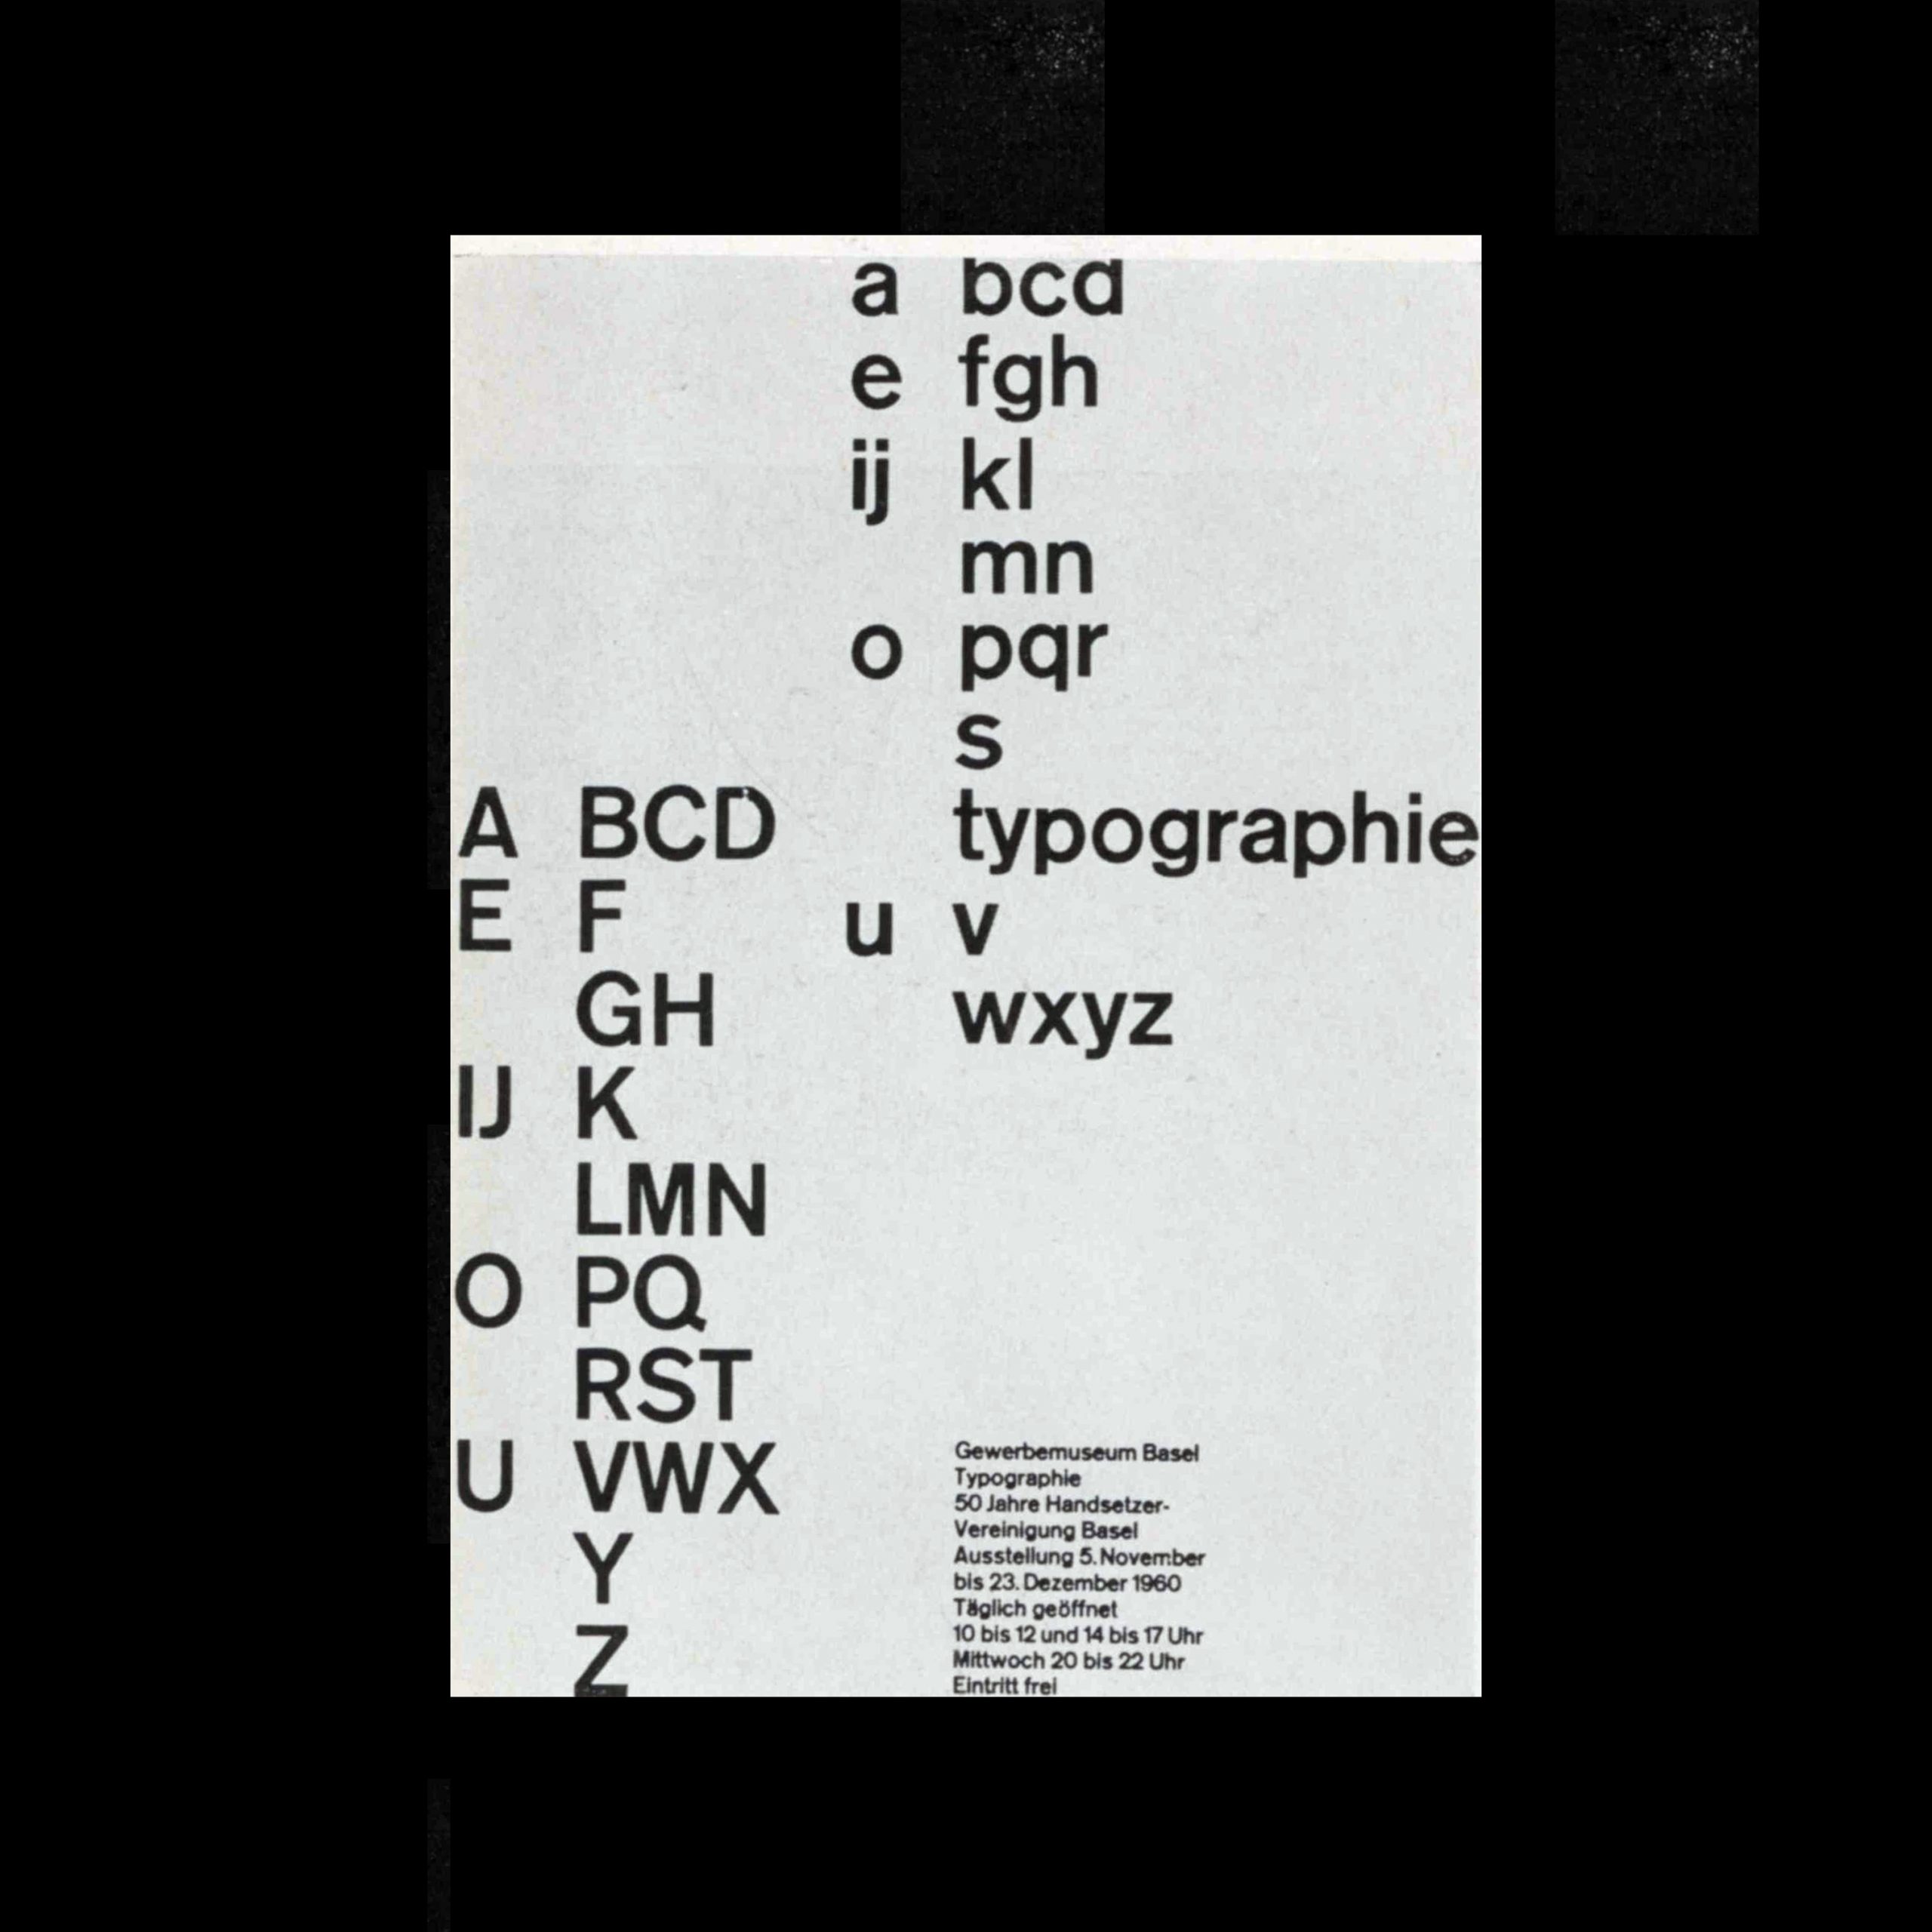 Poster for a Typographical Exhibition at the Gewerbemuseum, Basel designed by Robert Büchler